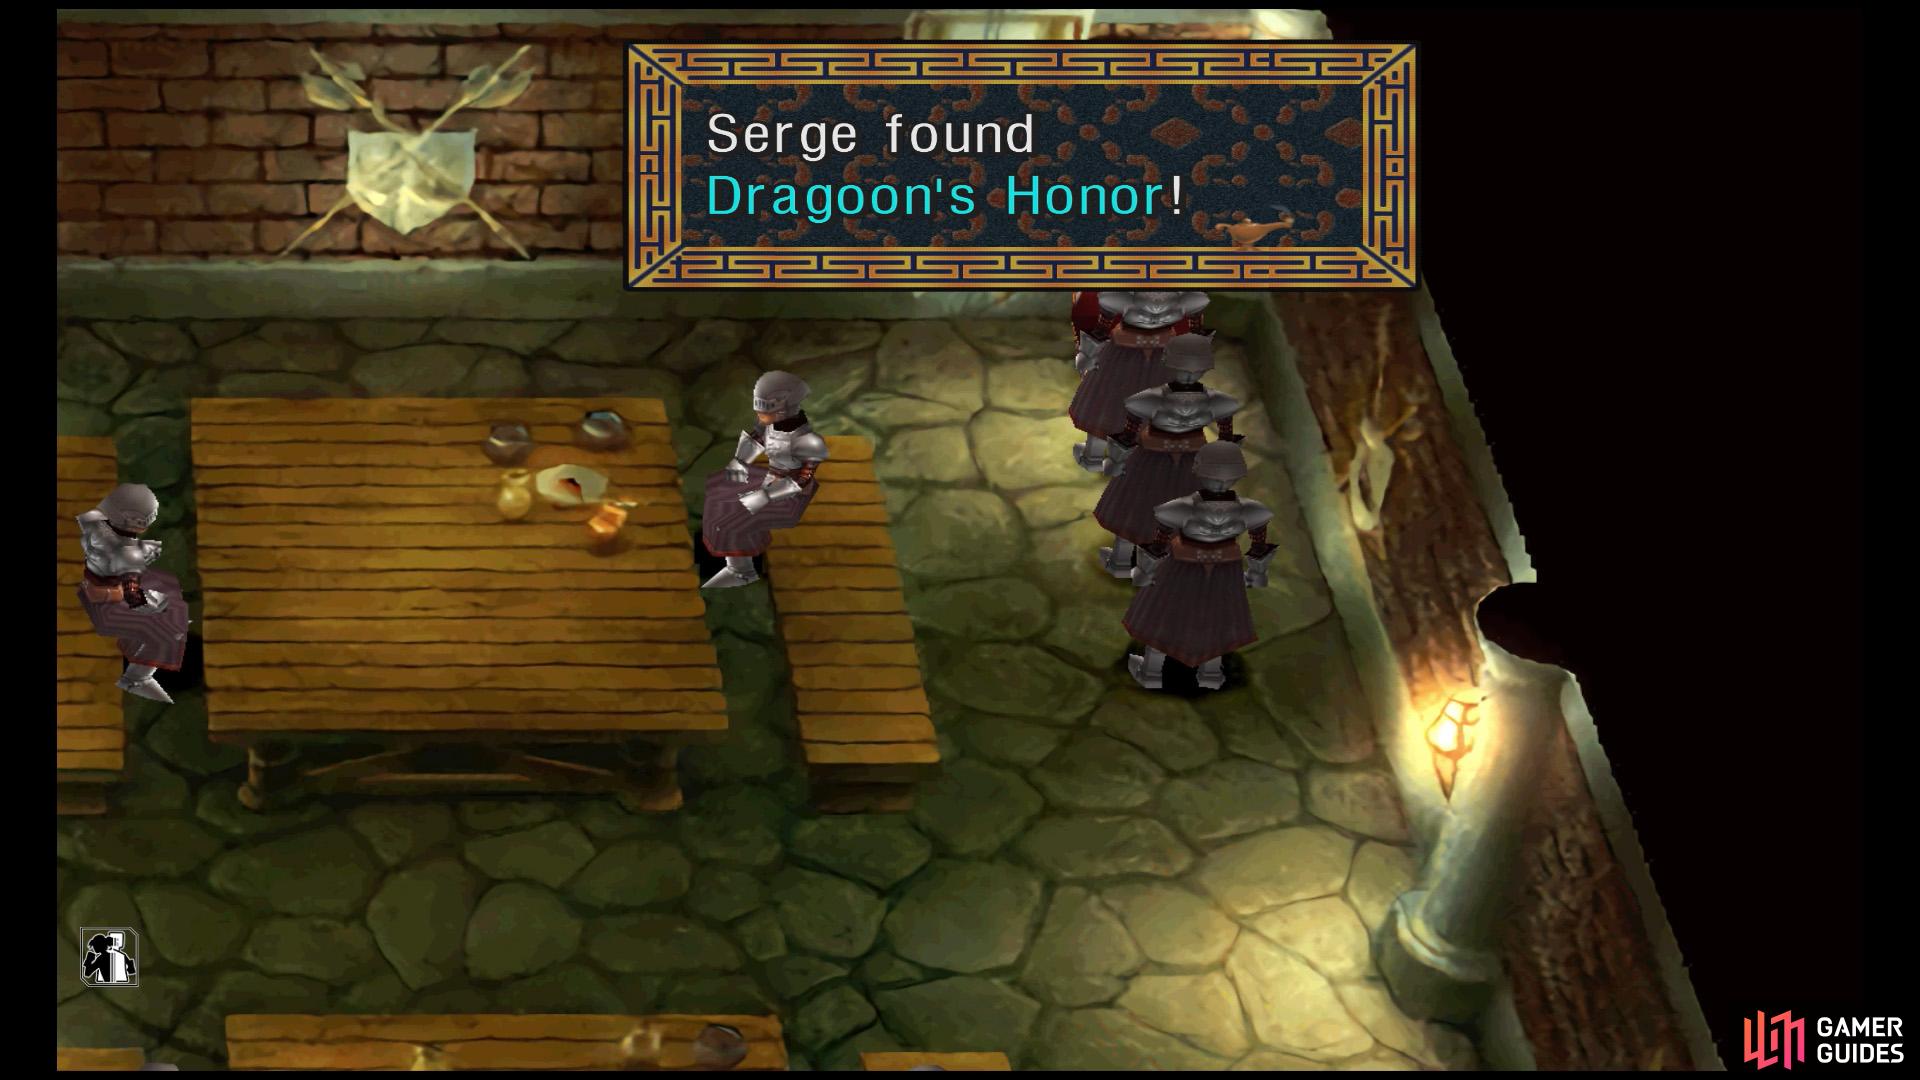 Dragoon's Honor by the top-right corner.